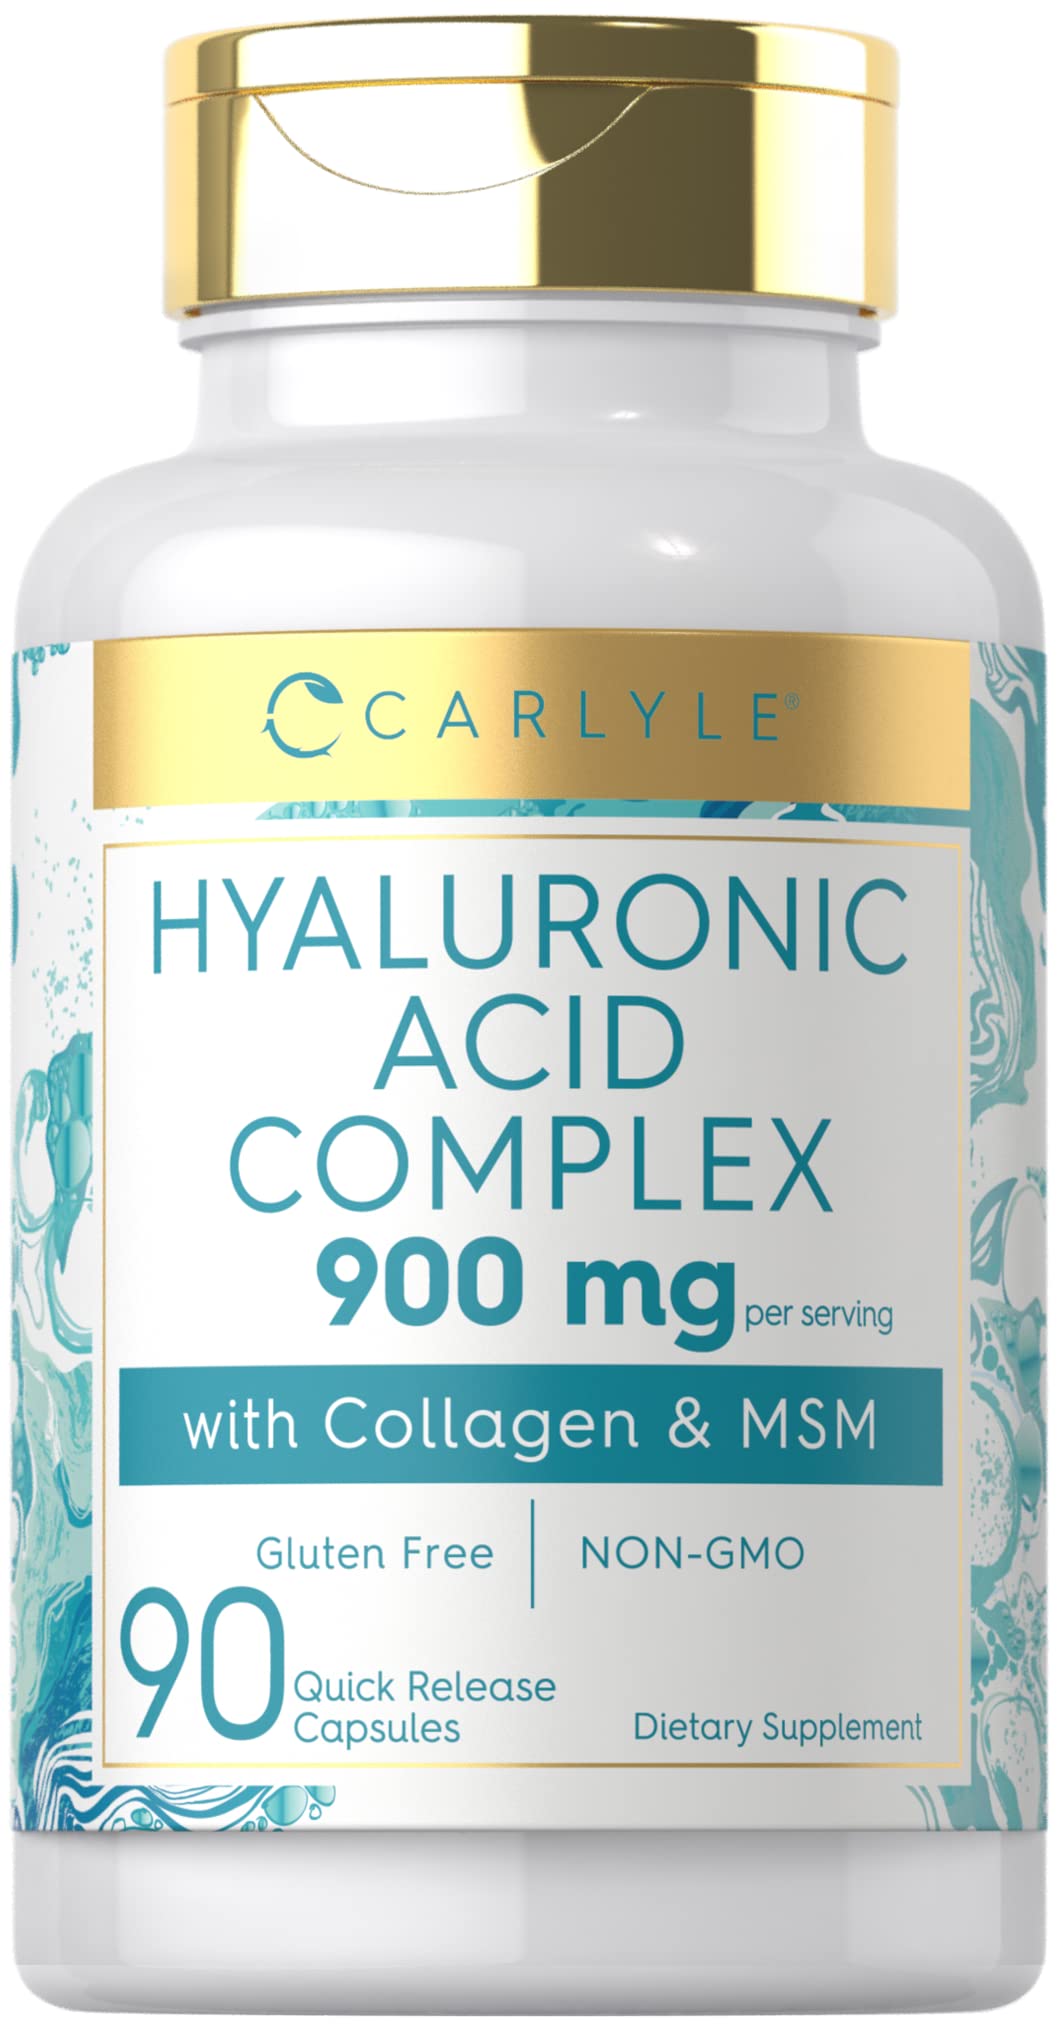 Carlyle Collagen with Hyaluronic Acid 900mg | 90 Capsules | with MSM | Hydrolyzed Collagen Complex | Non-GMO, Gluten Free Supplement